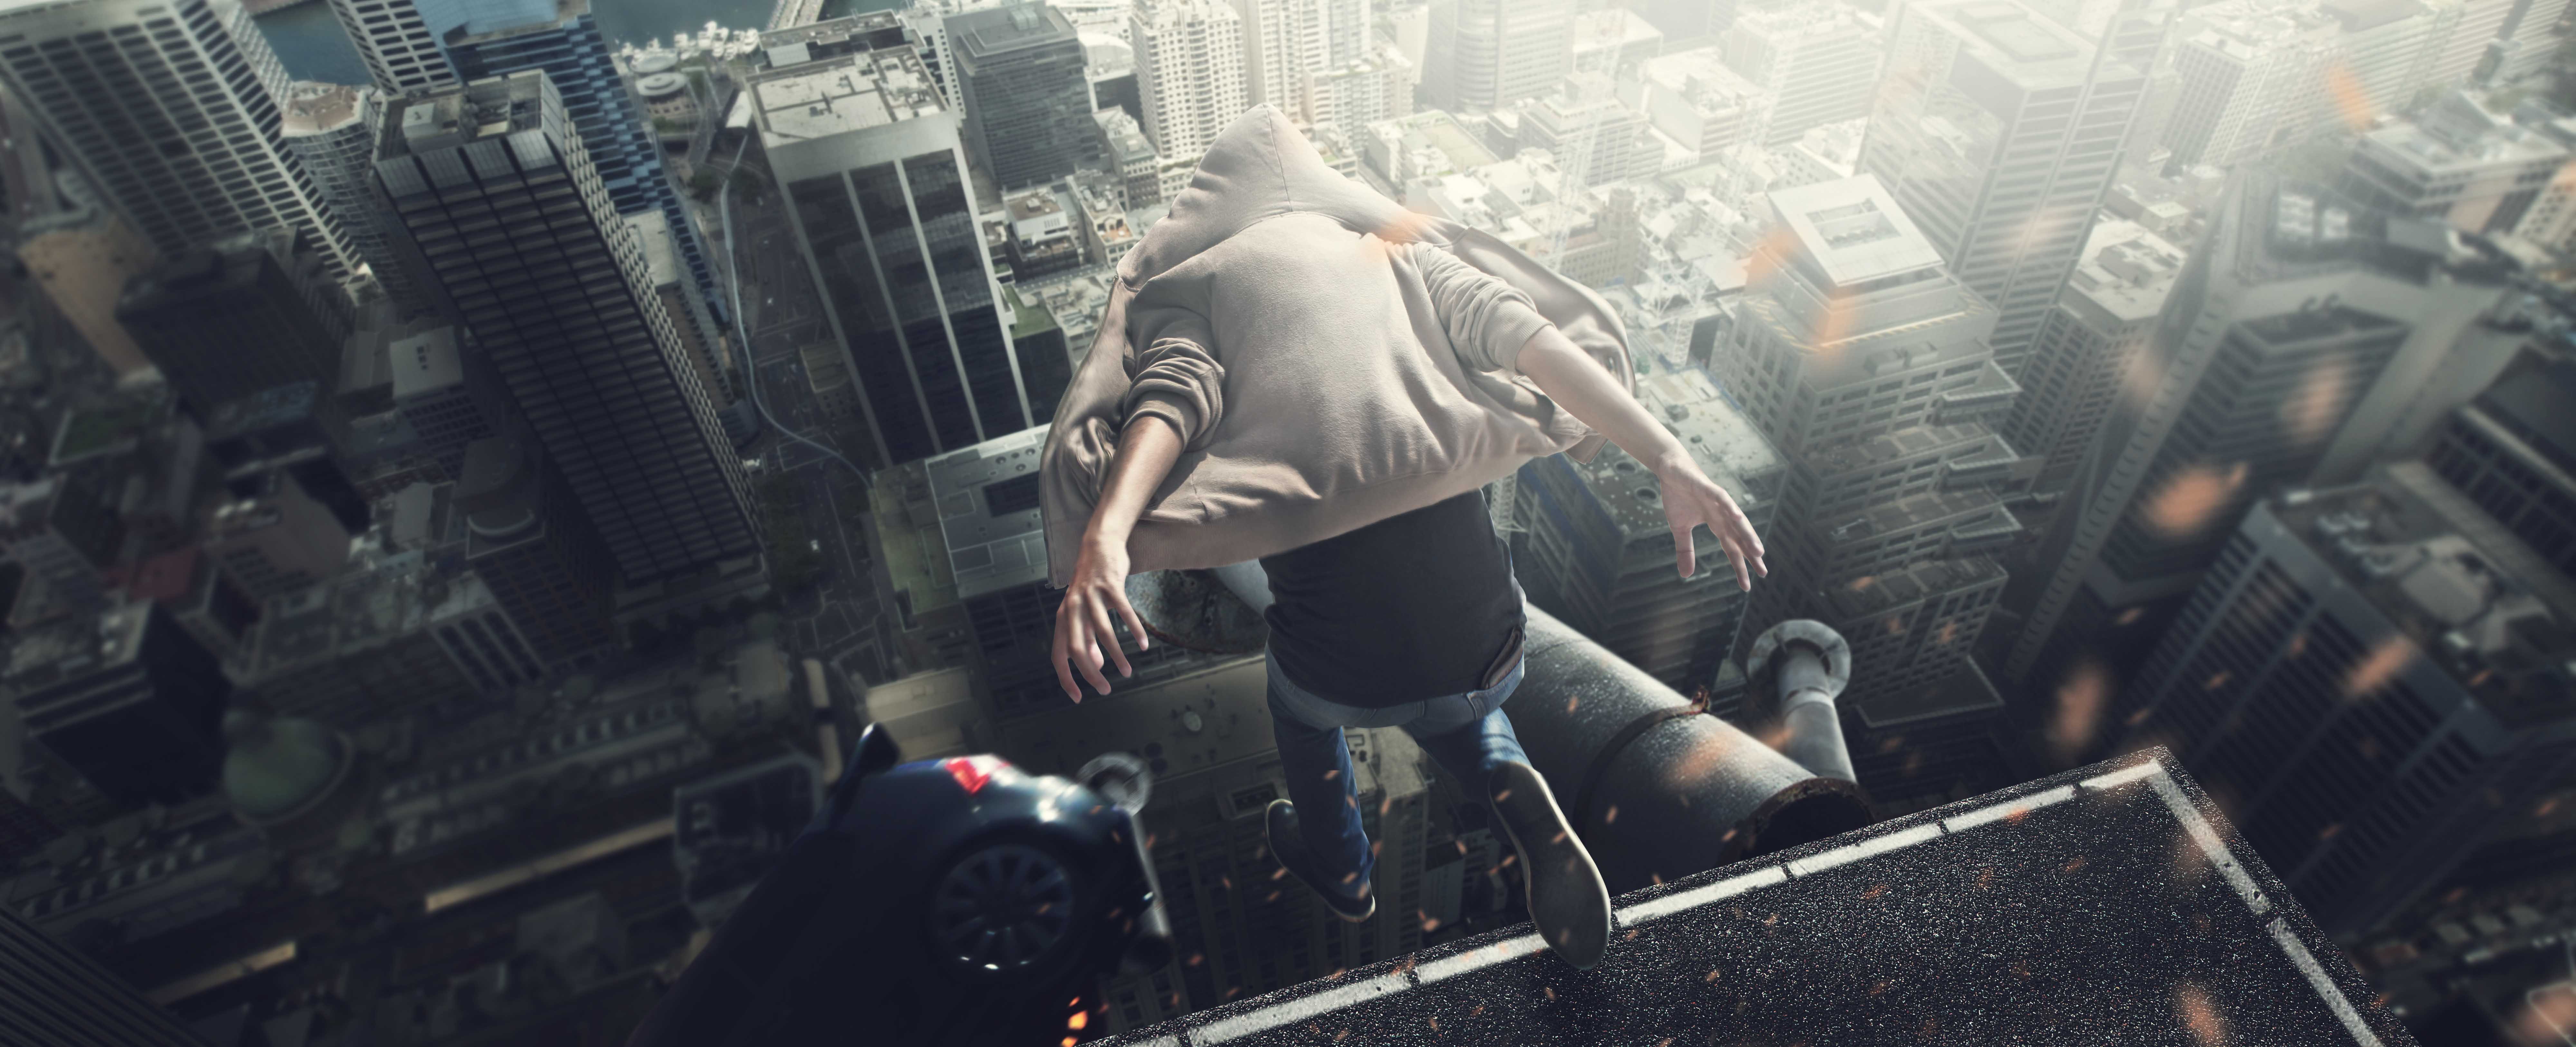 Jump From The Building 8k, HD Photography, 4k Wallpaper, Image